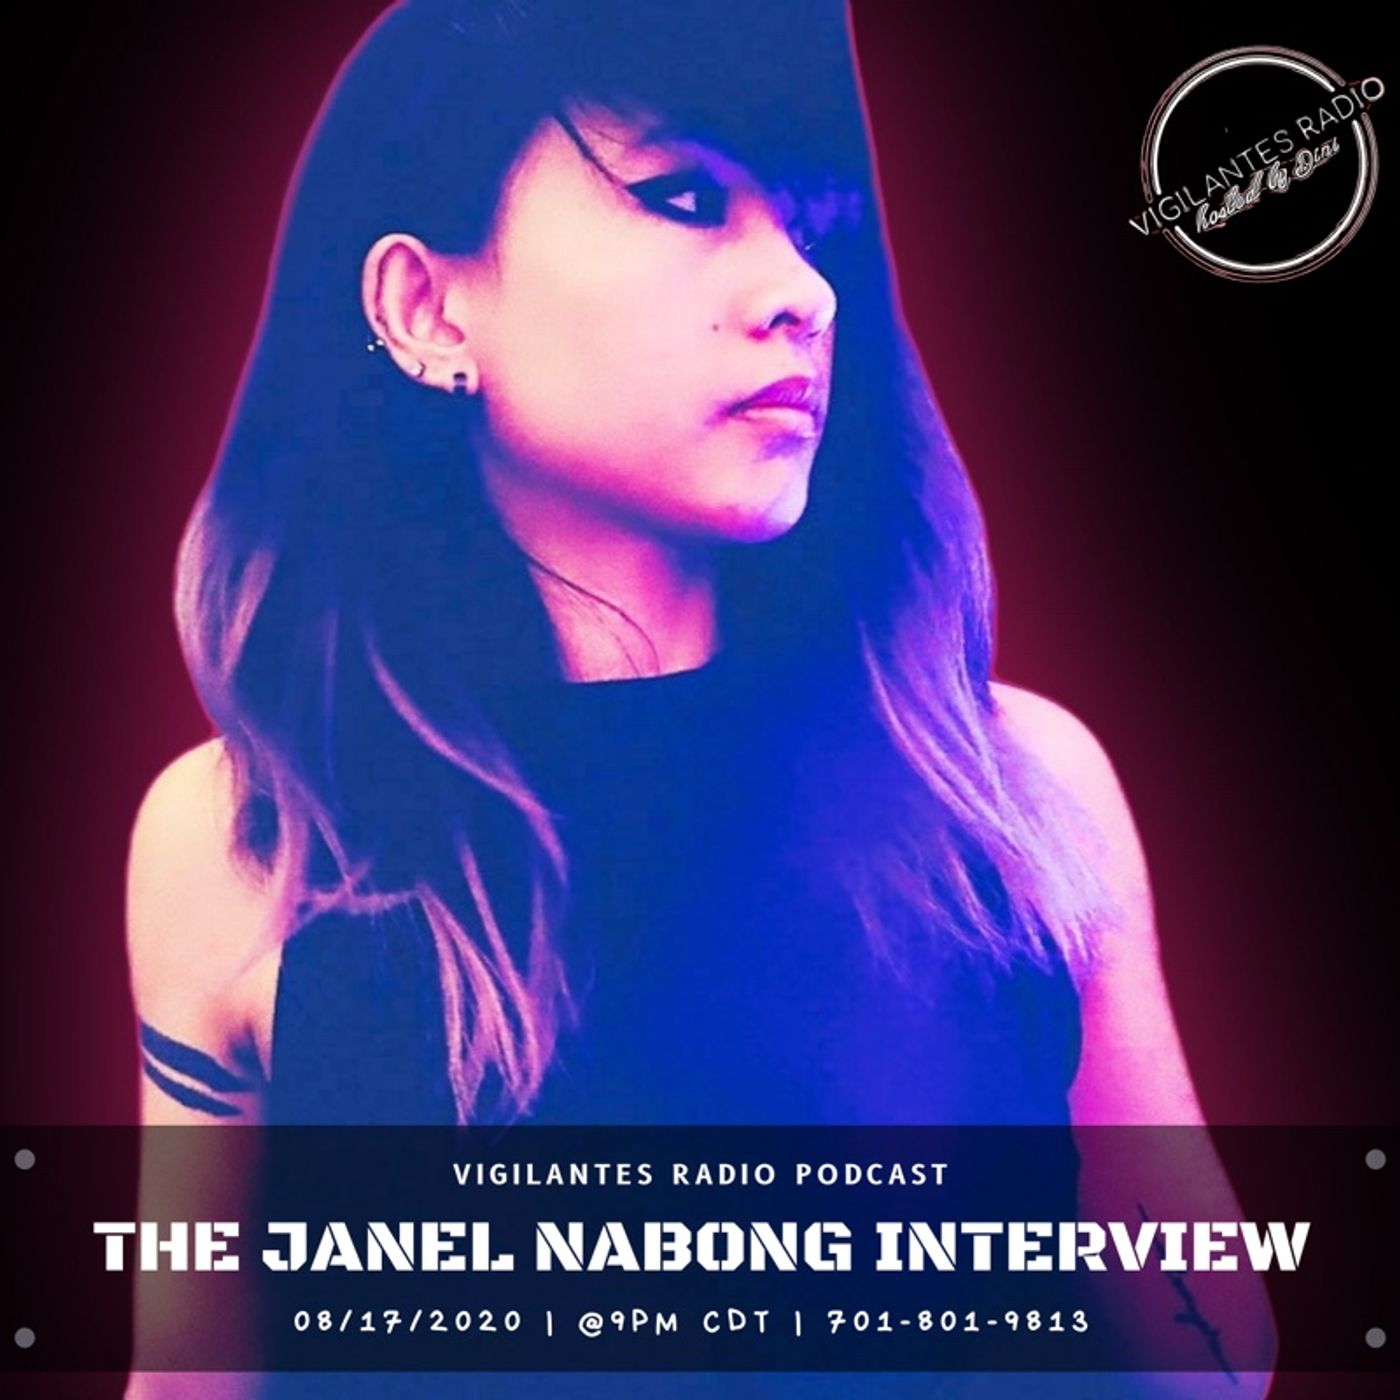 The Janel Nabong Interview. Image